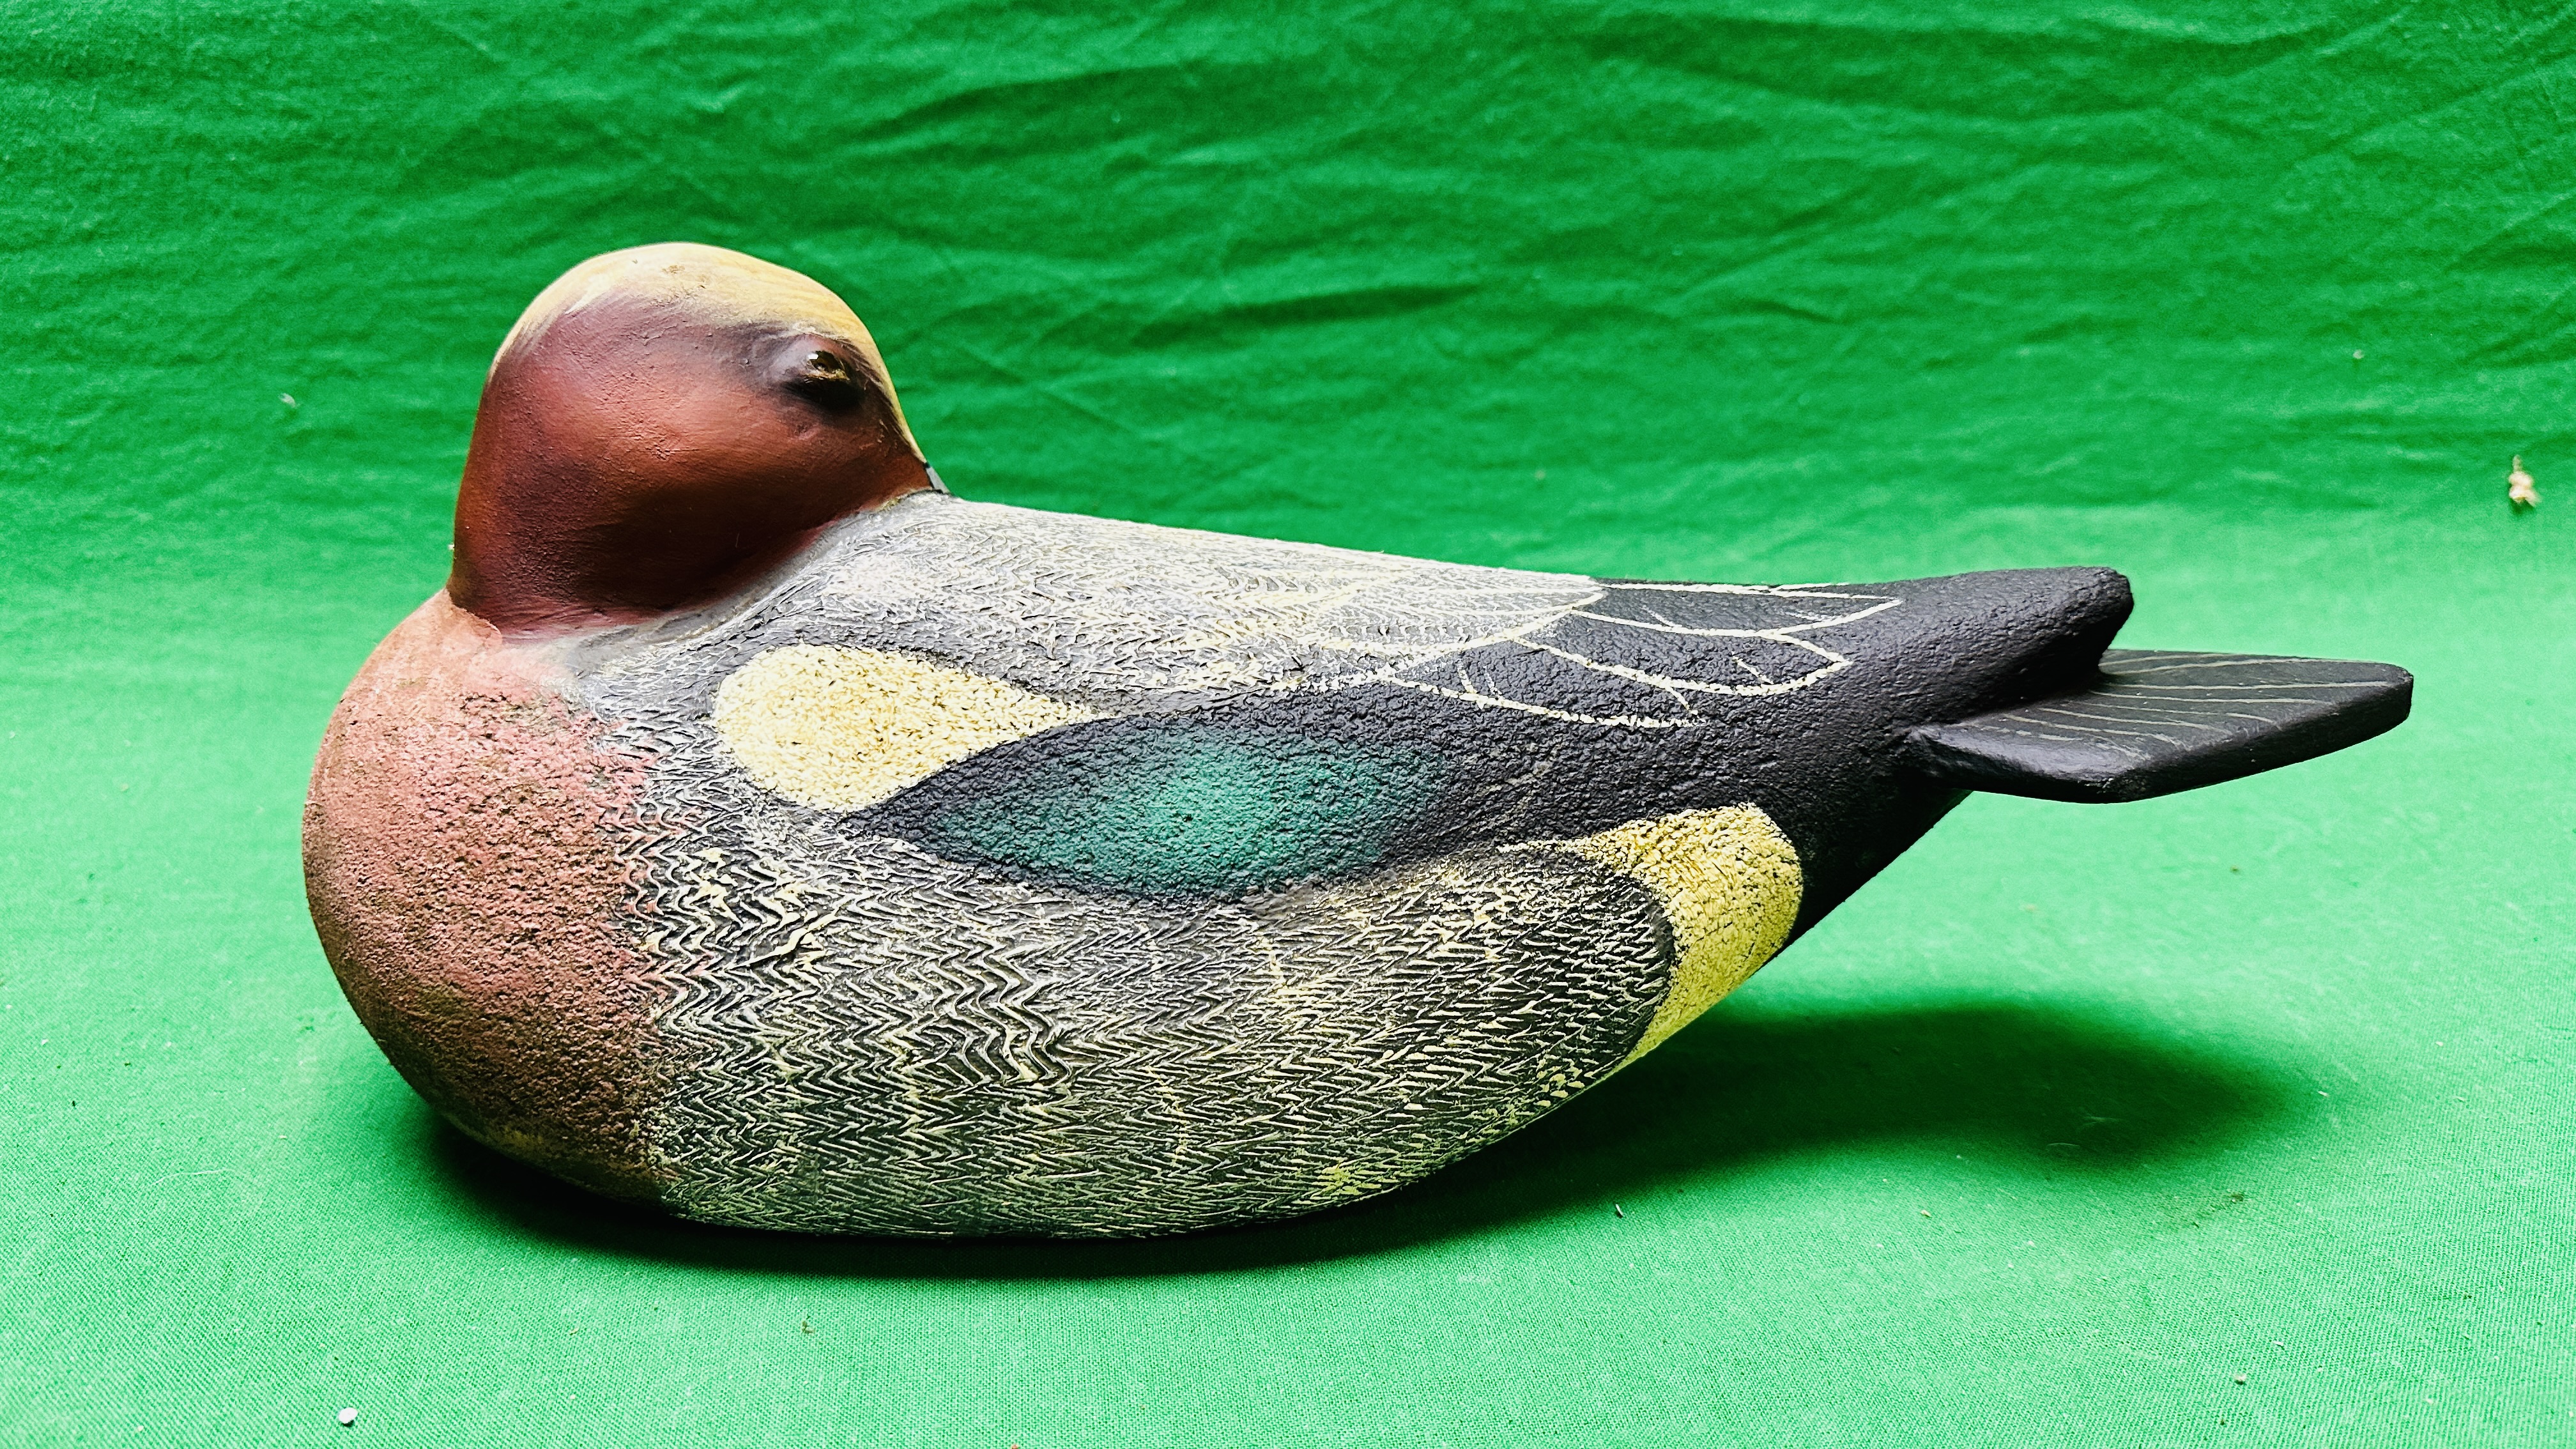 A HANDCRAFTED SET OF THREE DUCK DECOYS HAVING HANDPAINTED DETAIL AND GLASS EYES. - Image 7 of 8